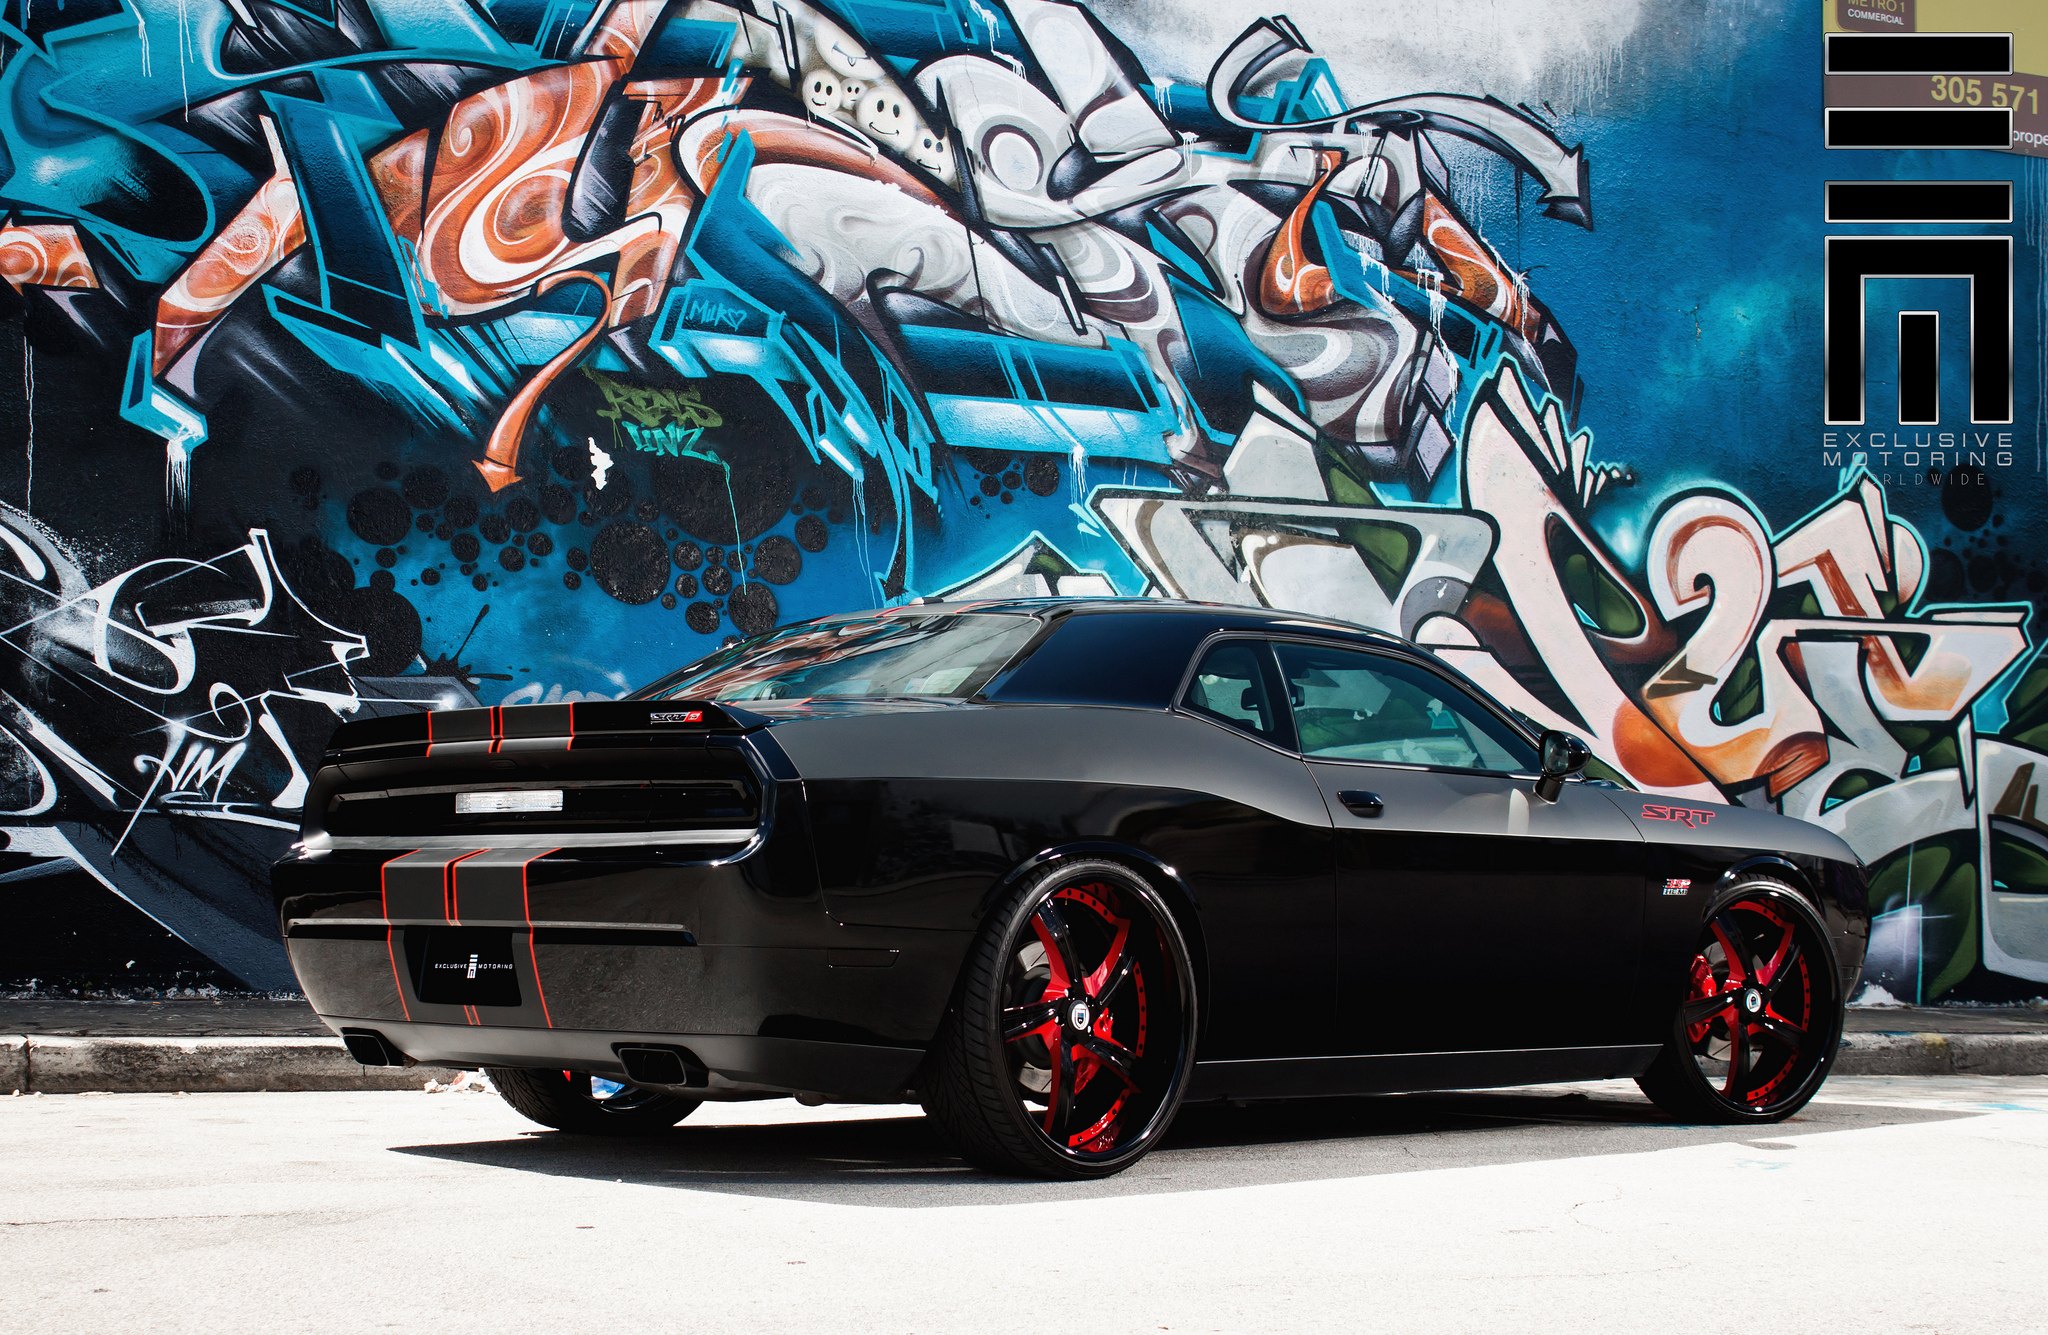 Dodge Challenger SRT slightly modified - Photo by Exclusive Motoring